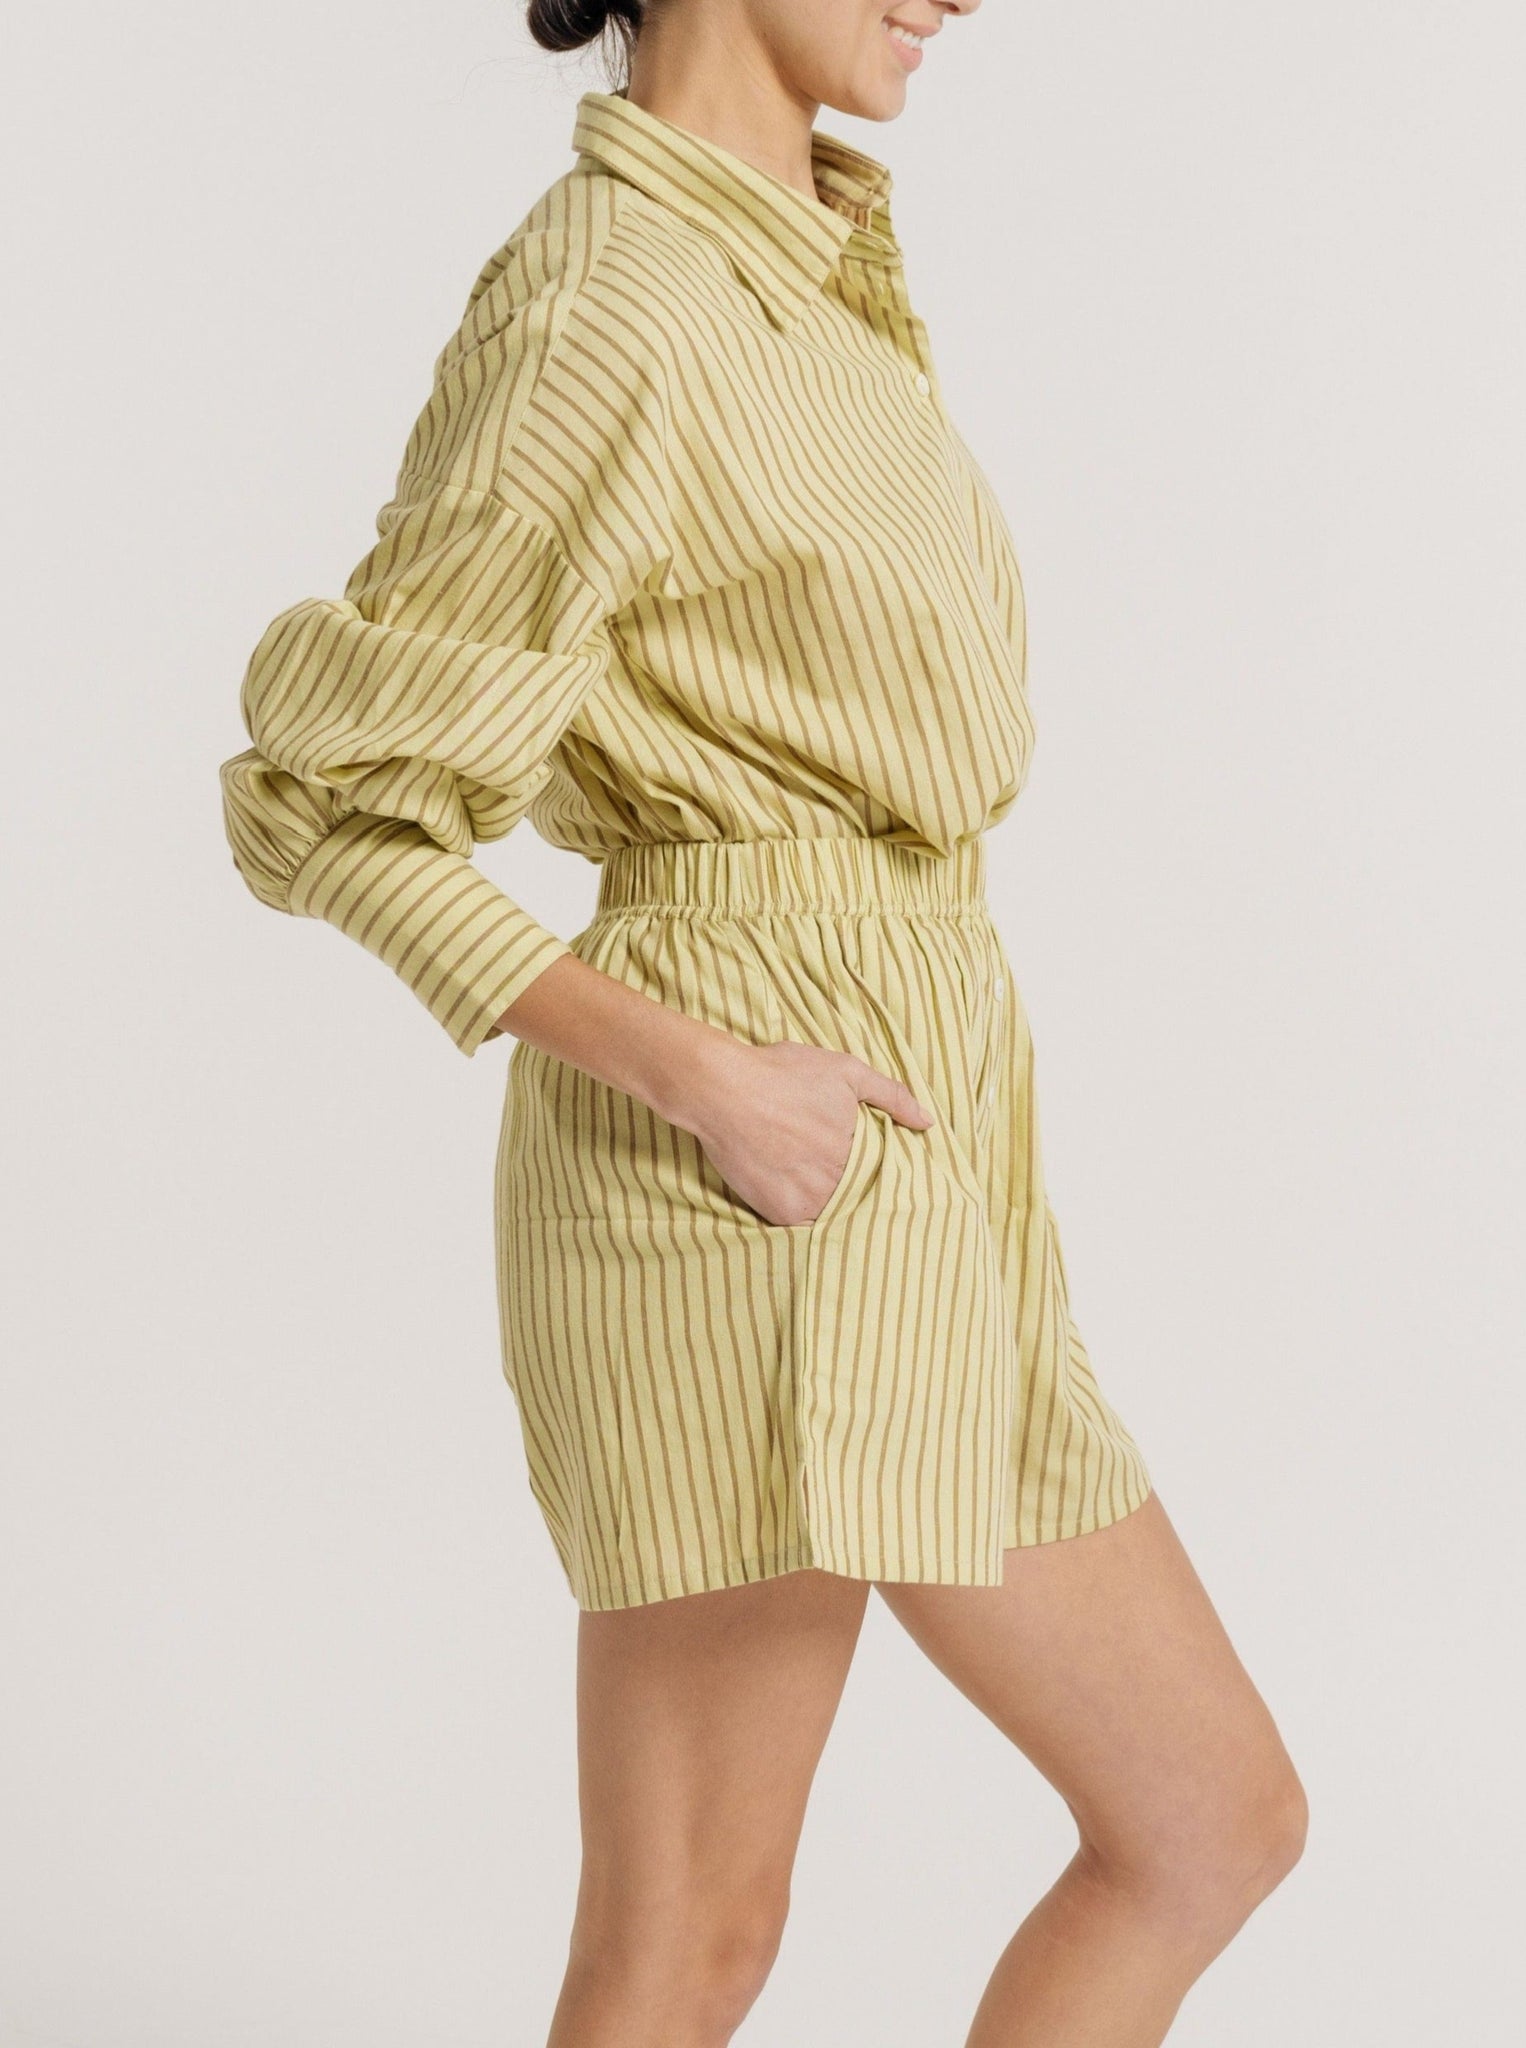 The model is wearing a yellow striped Easy Short - Feather Grass Stripe romper made of cotton.